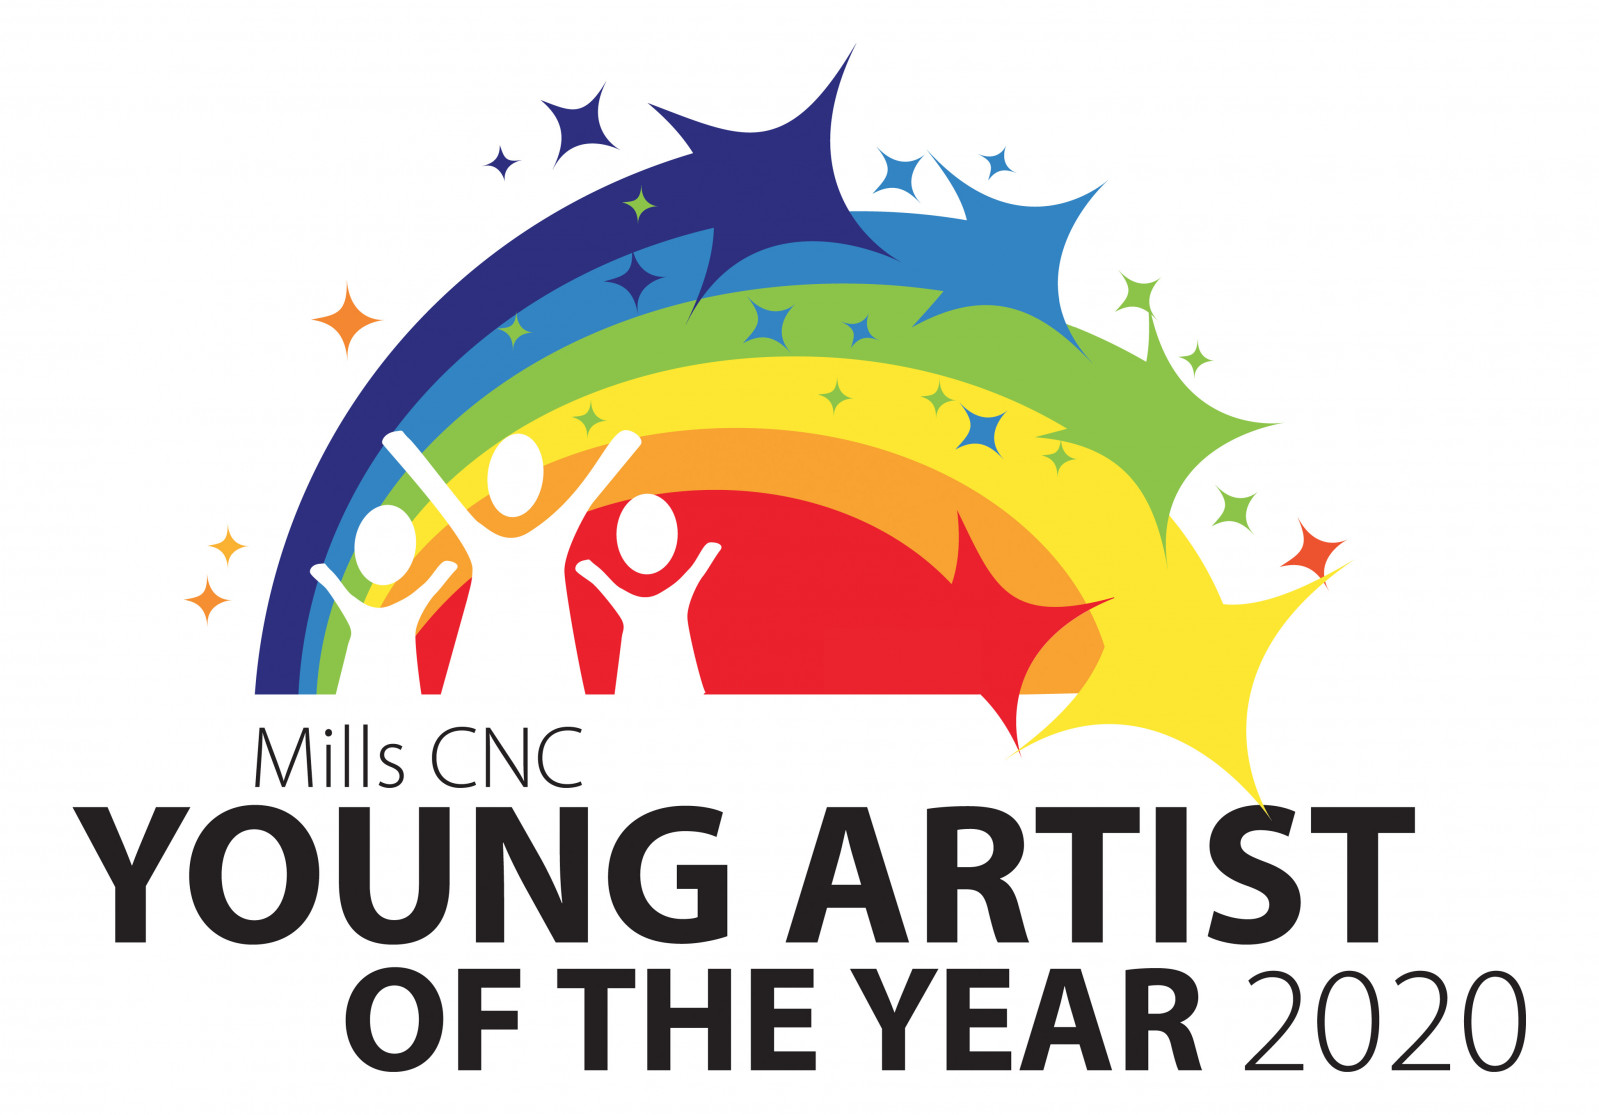 State of the art! Mills CNC launches its Young Art...